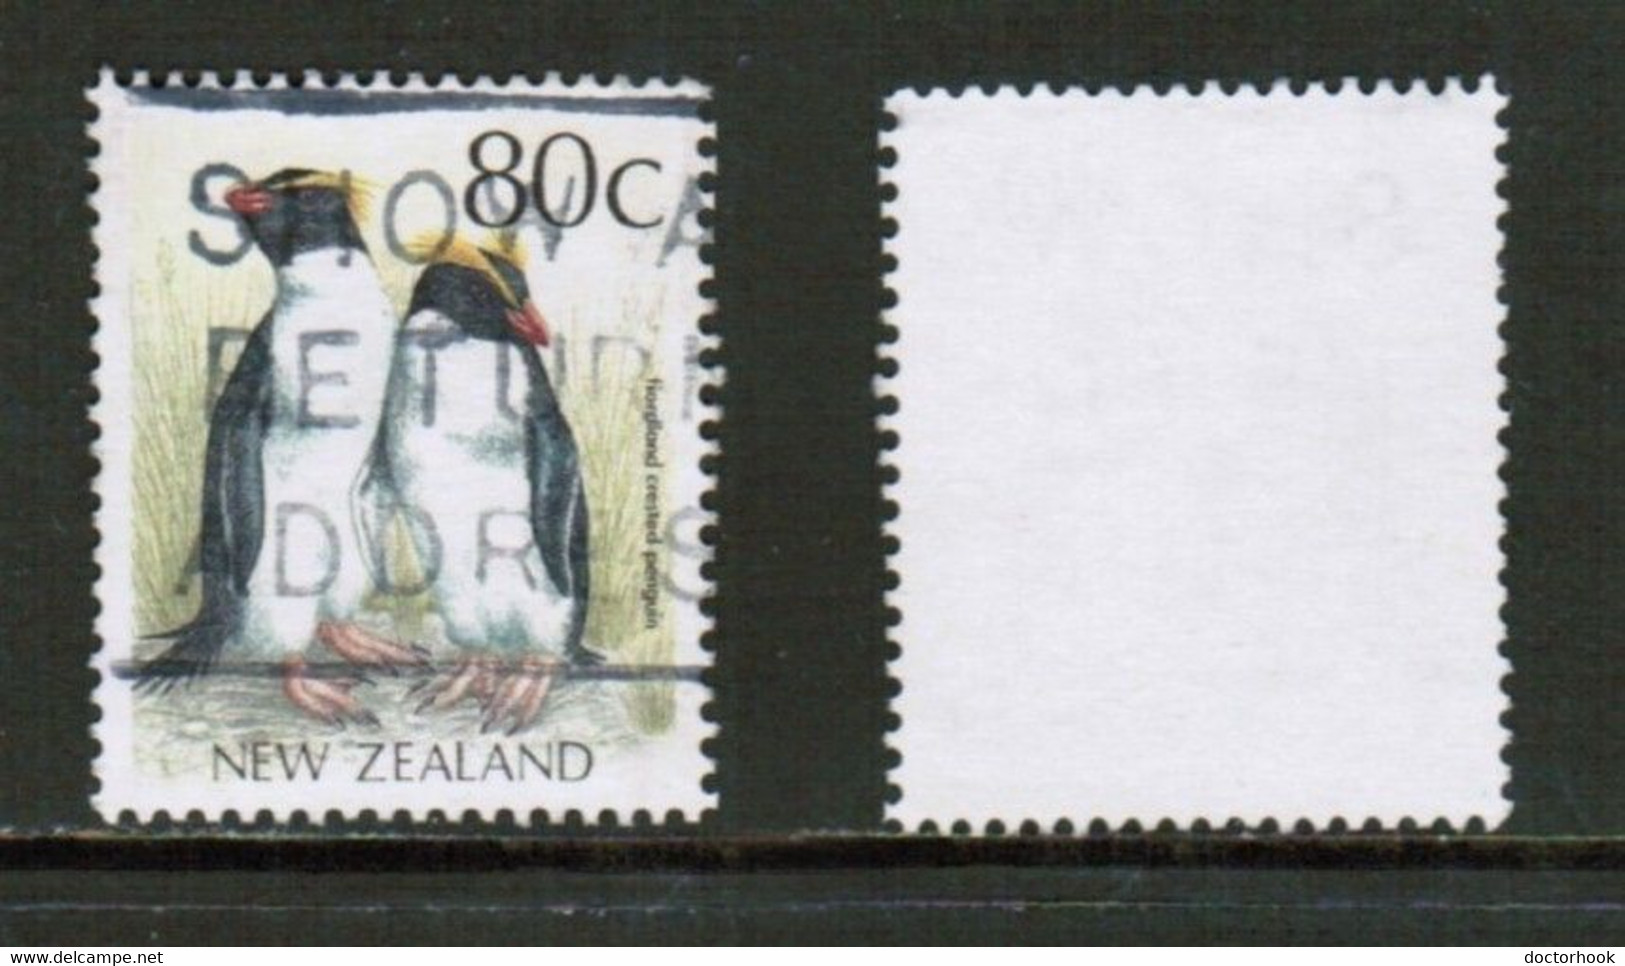 NEW ZEALAND   Scott # 925 USED (CONDITION AS PER SCAN) (WW-2-111) - Used Stamps